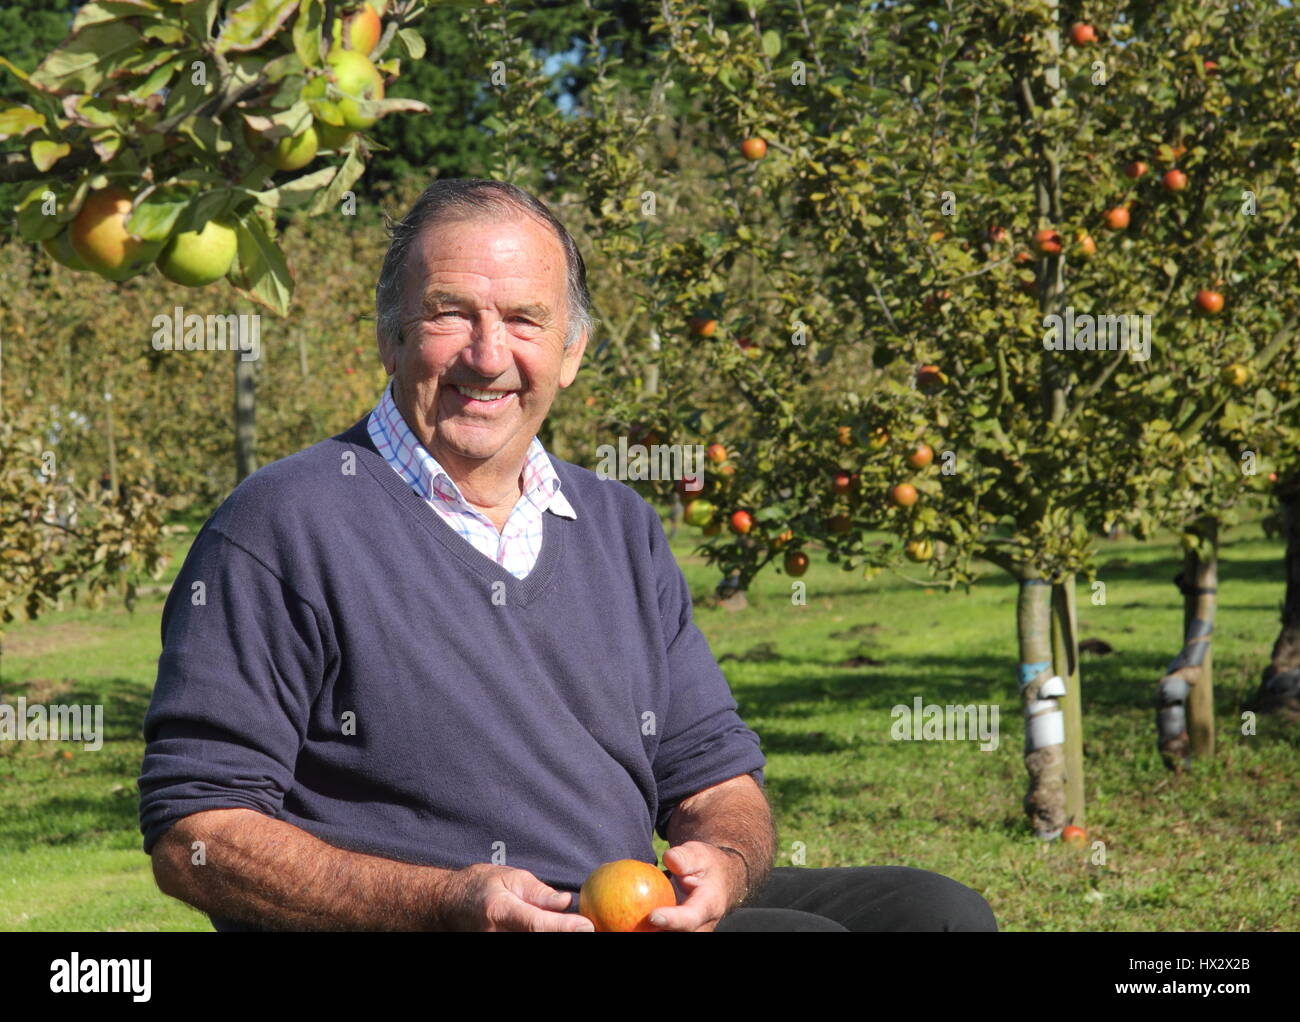 Apple expert, John Hempsall, in his heritage apple orchard at East Markham, during this Nottinghamshire village's annual Apple Day event in autumn Stock Photo